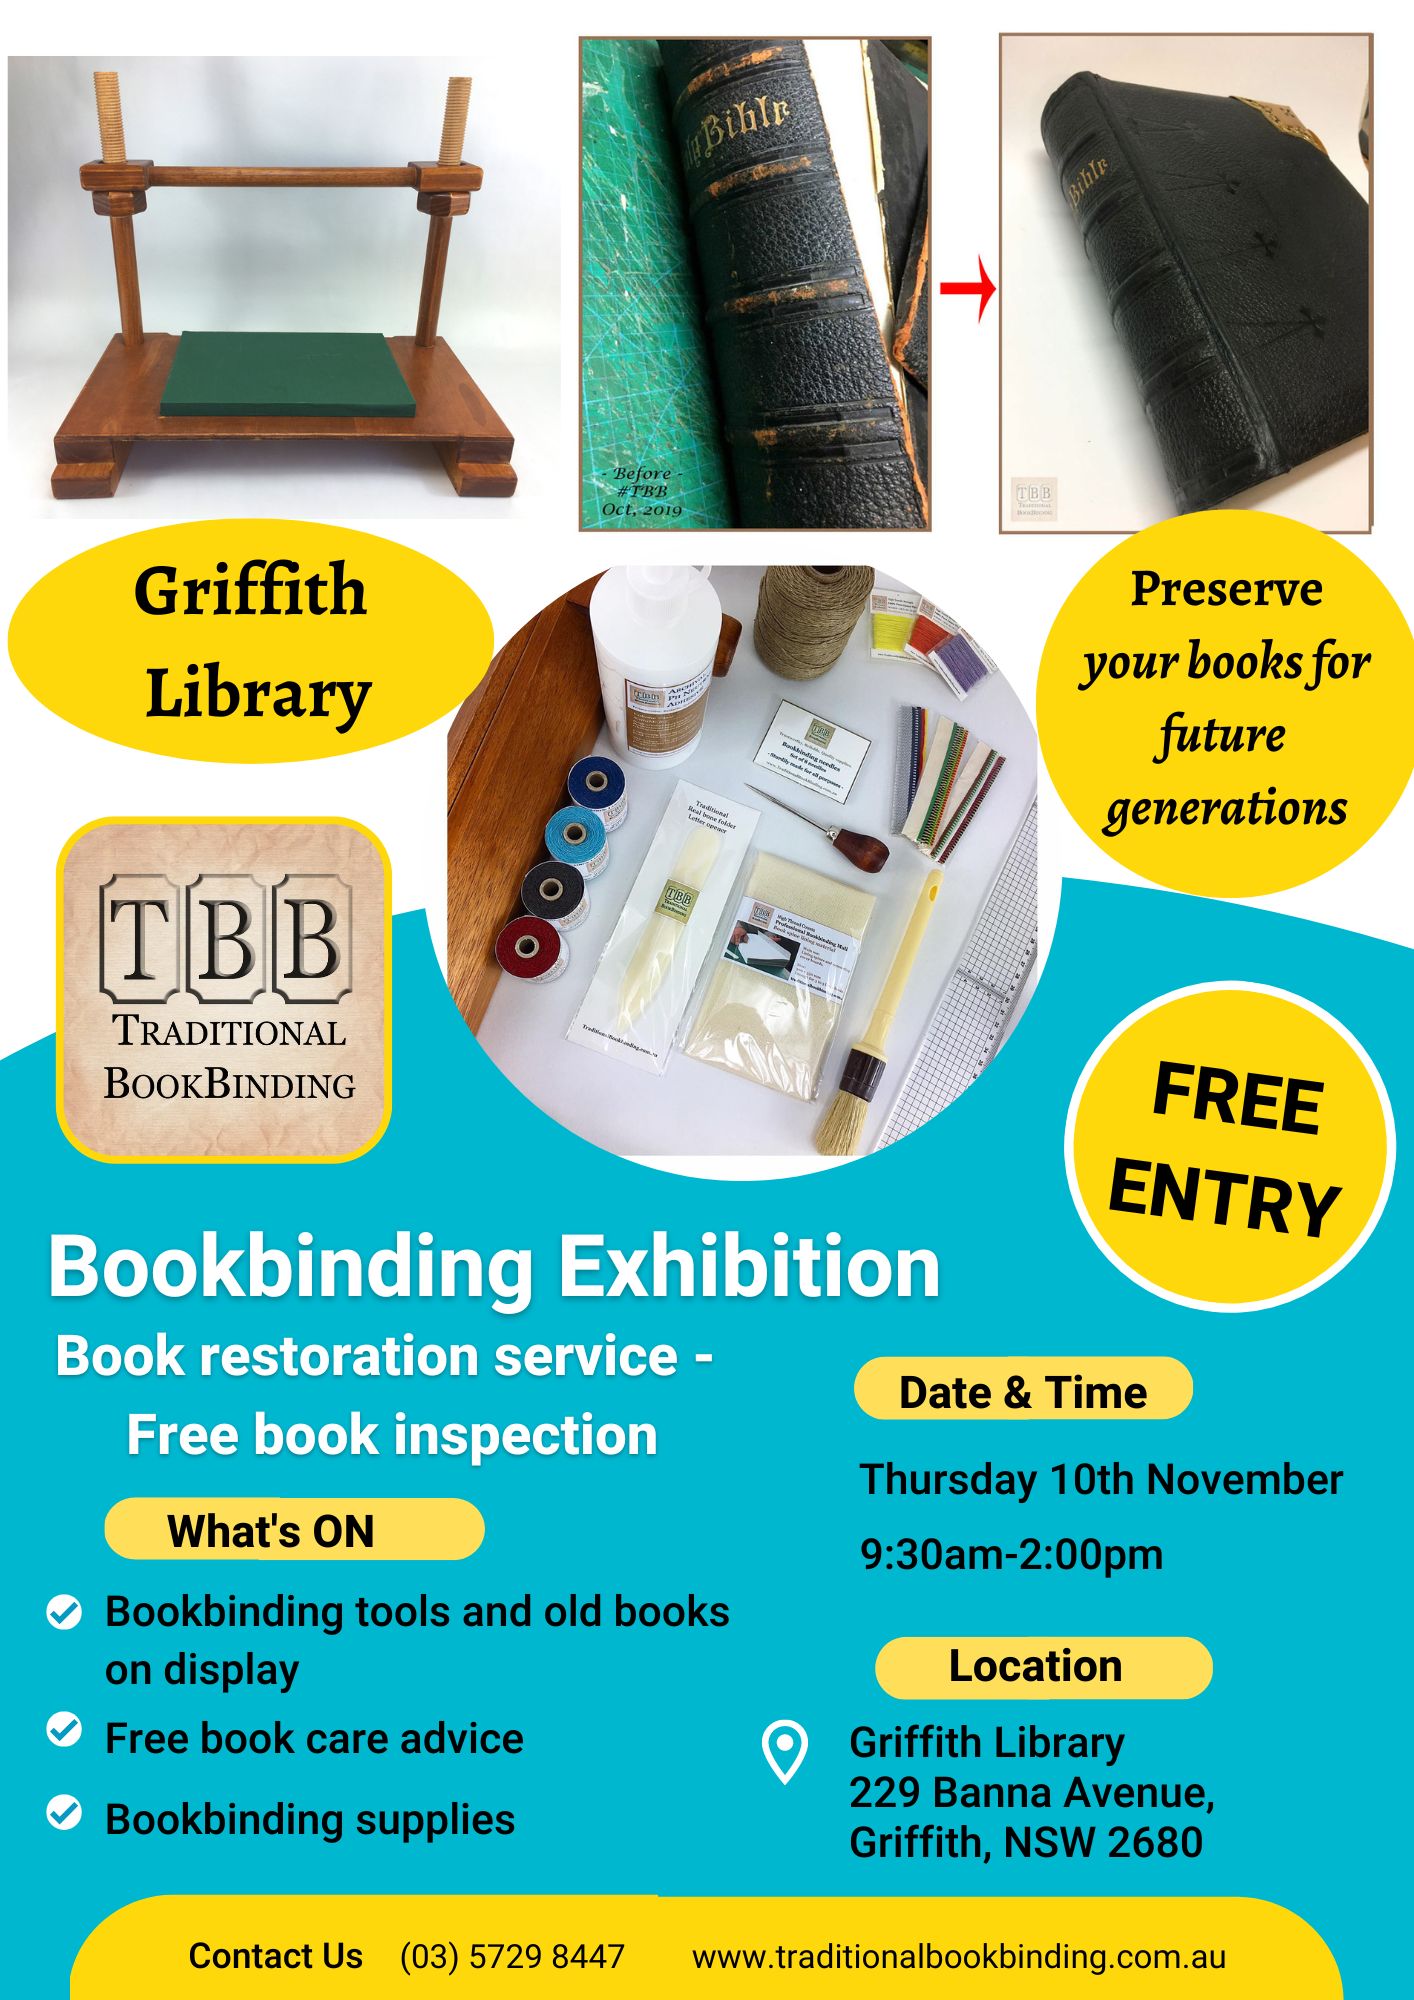 Traditional Bookbinding Exhibition at Griffith City Library